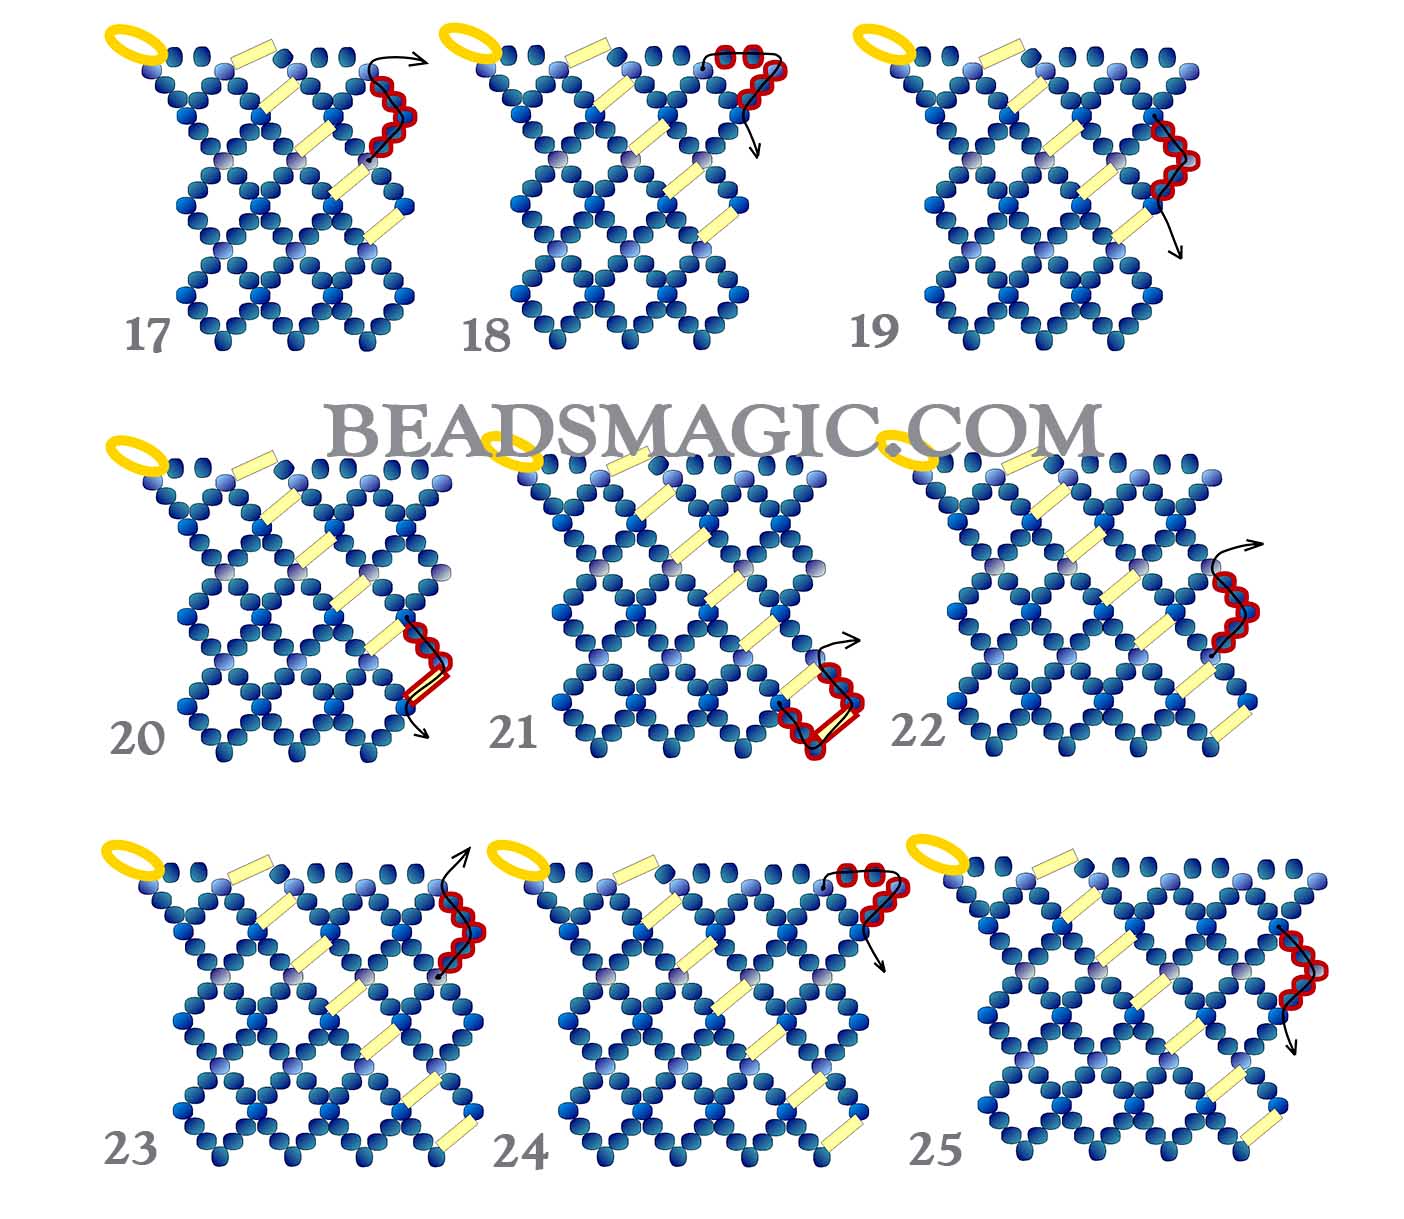 Free pattern, beaded necklace, bead patterns, seed beads necklace, seed beads, bugle beads, basic netting stitch, Bead netting, bead beginner, free step-by-step beading instruction, beading school